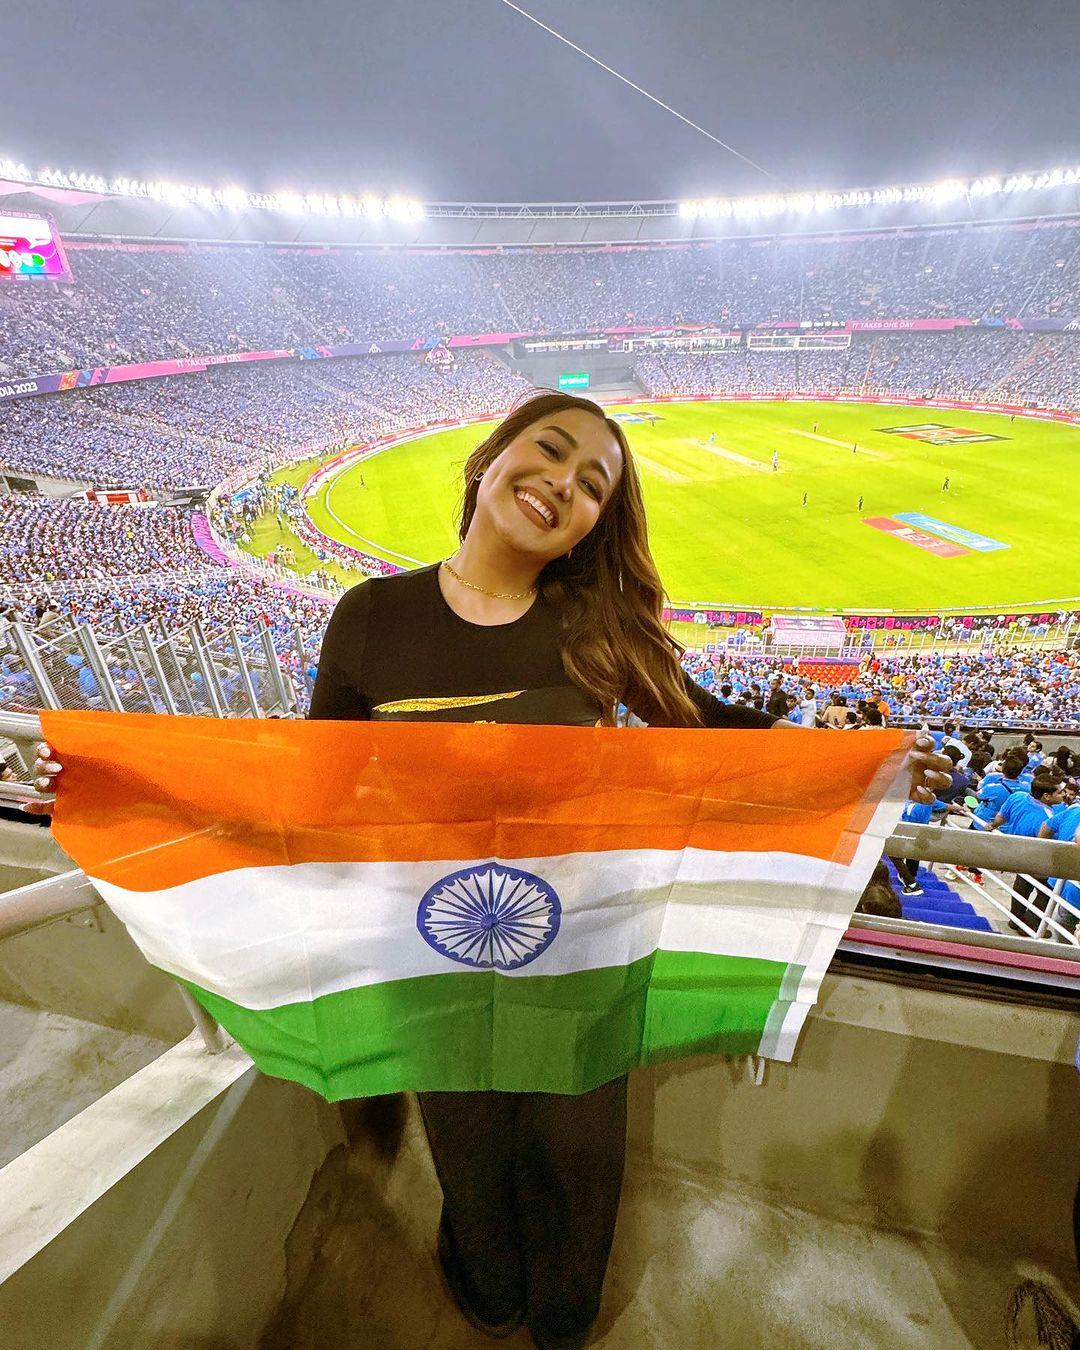 He joined the match with her husband and, after India's victory, won over fans by signing autographs graciously. Neha's style was on point as she sported a black top with a trendy scarf and black pants. 